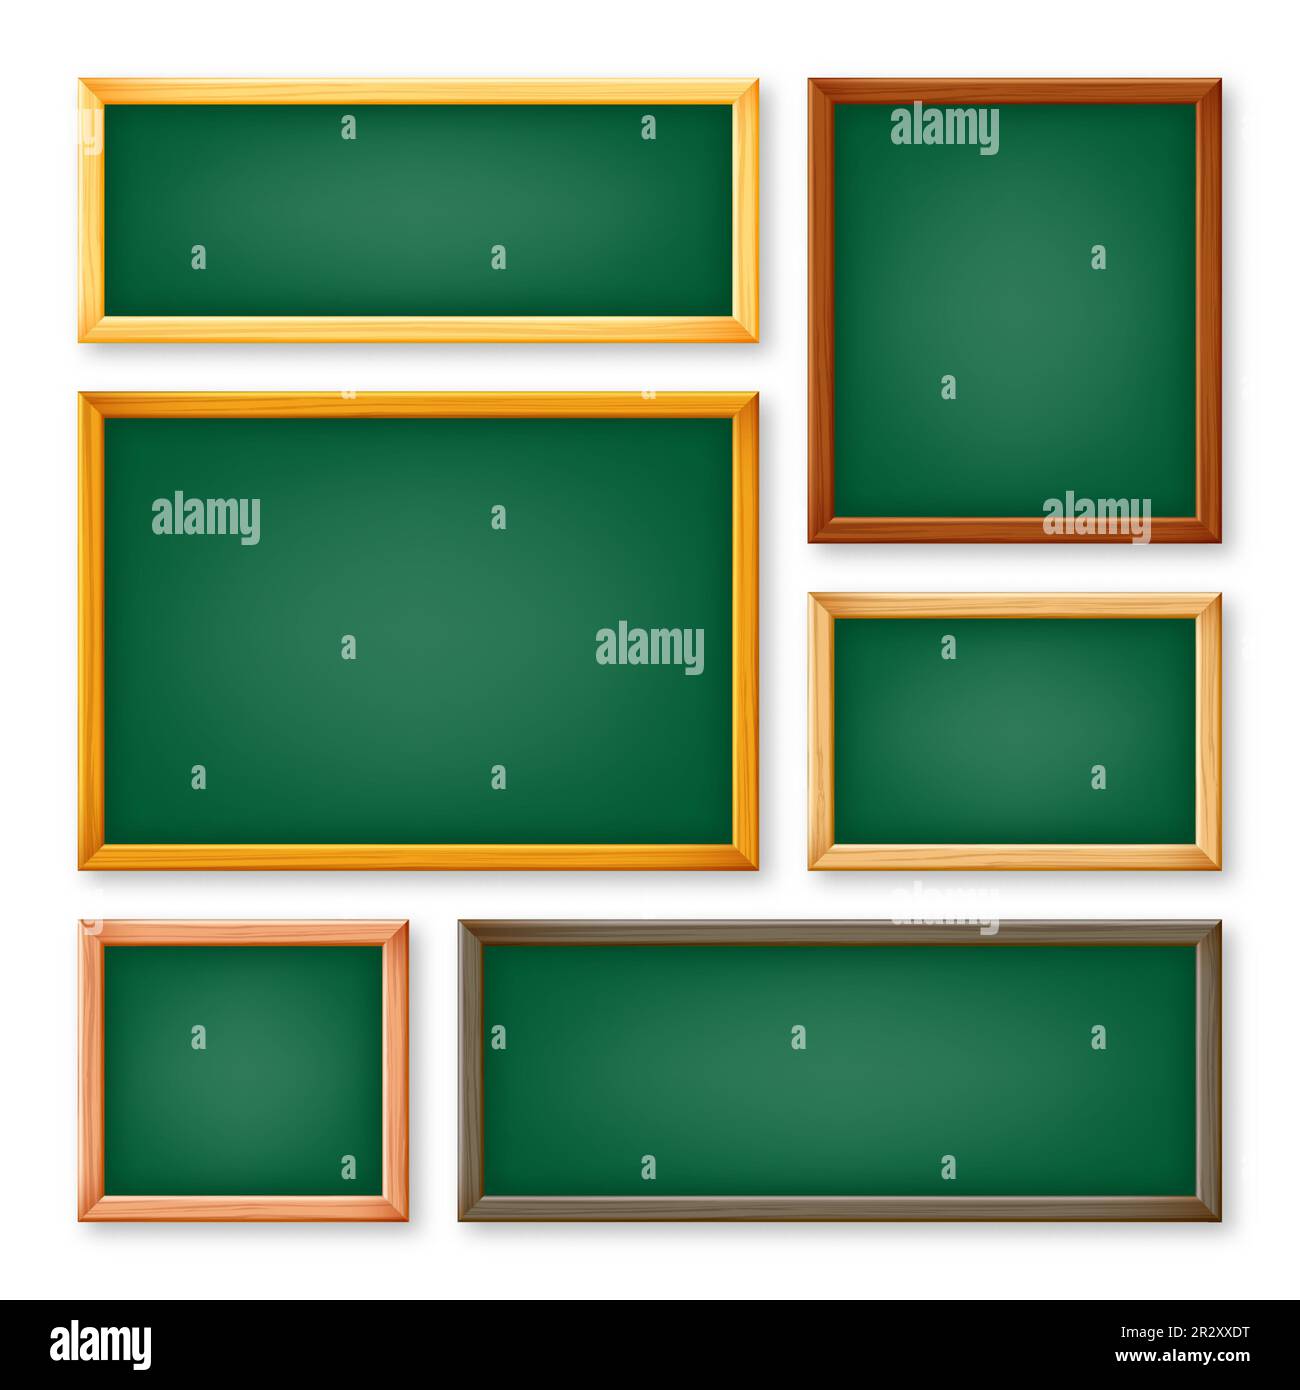 Realistic various chalkboards in a wooden frame. Green restaurant menu board. School blackboard, writing surface for text or drawing. Blank Stock Vector